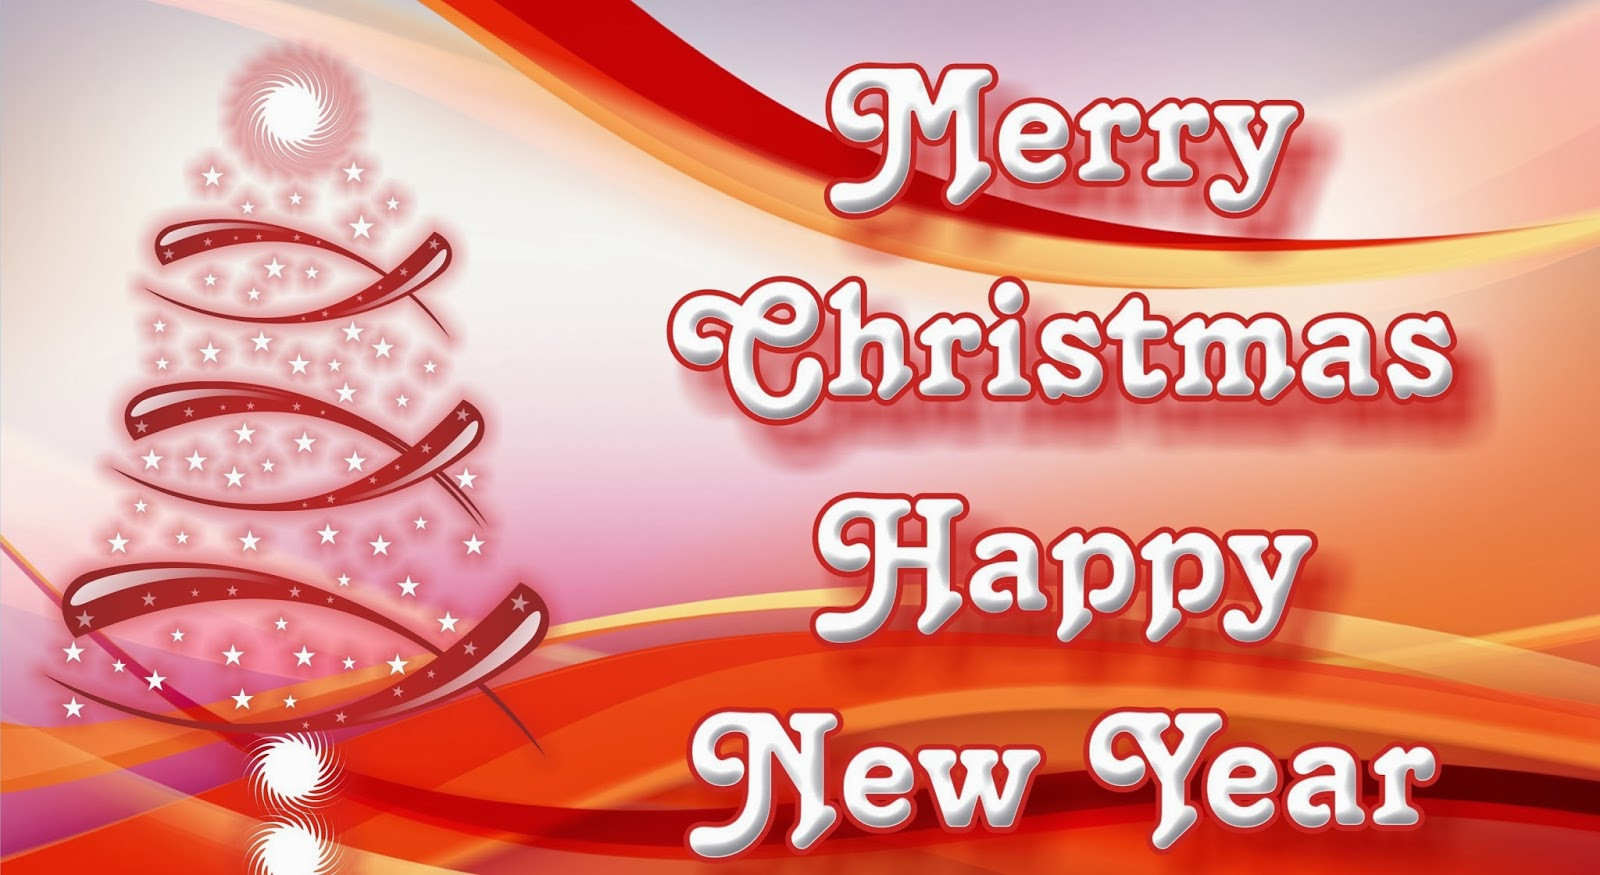 Merry Christmas And Happy New Year Quotes
 Merry Christmas And Happy New Year Quotes QuotesGram